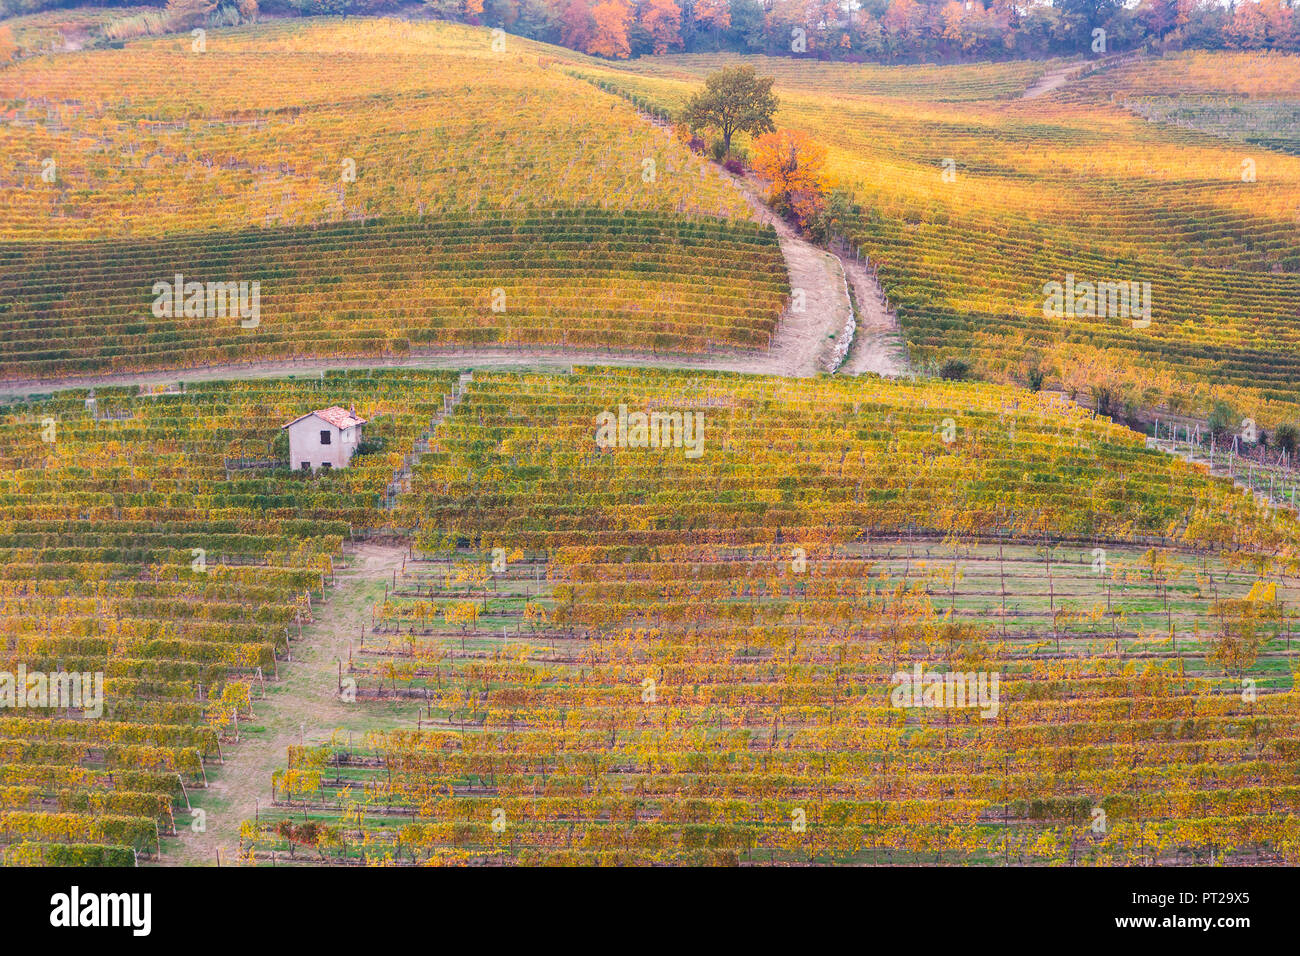 Rows of orange, yellow and green vineyards on the hill in autumn in Piedmont, Northern Italy, Europe, Stock Photo